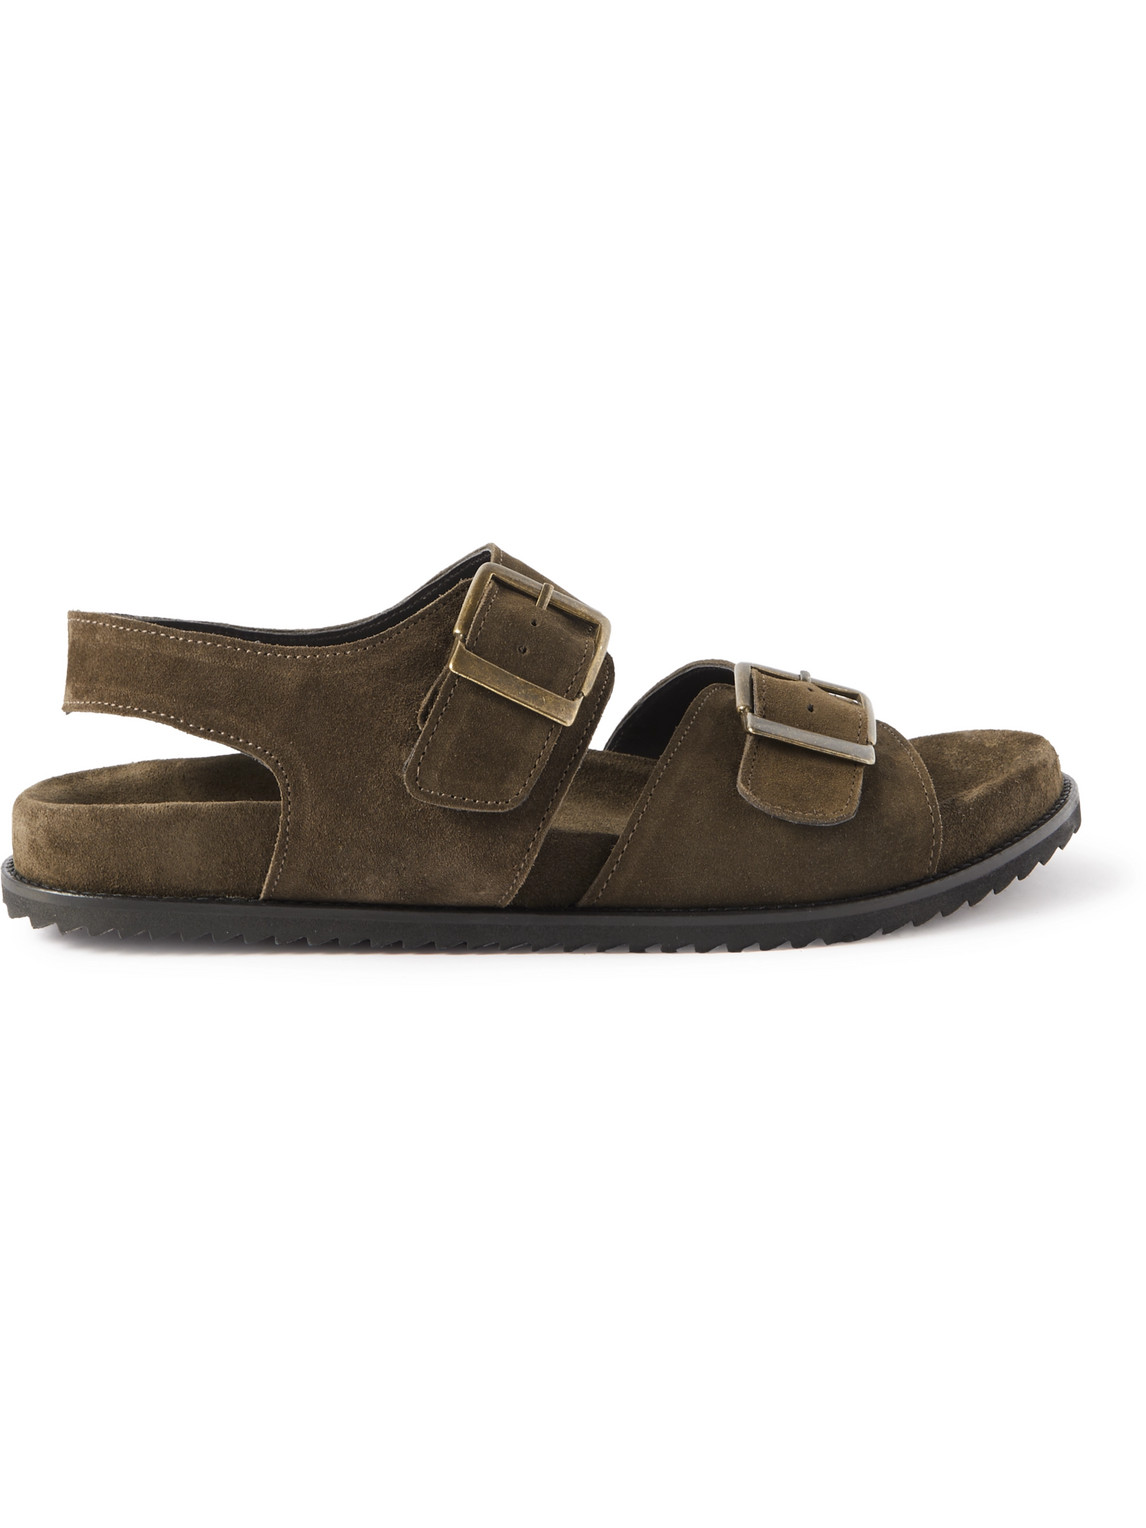 David Buckled Regenerated Suede by evolo® Sandals